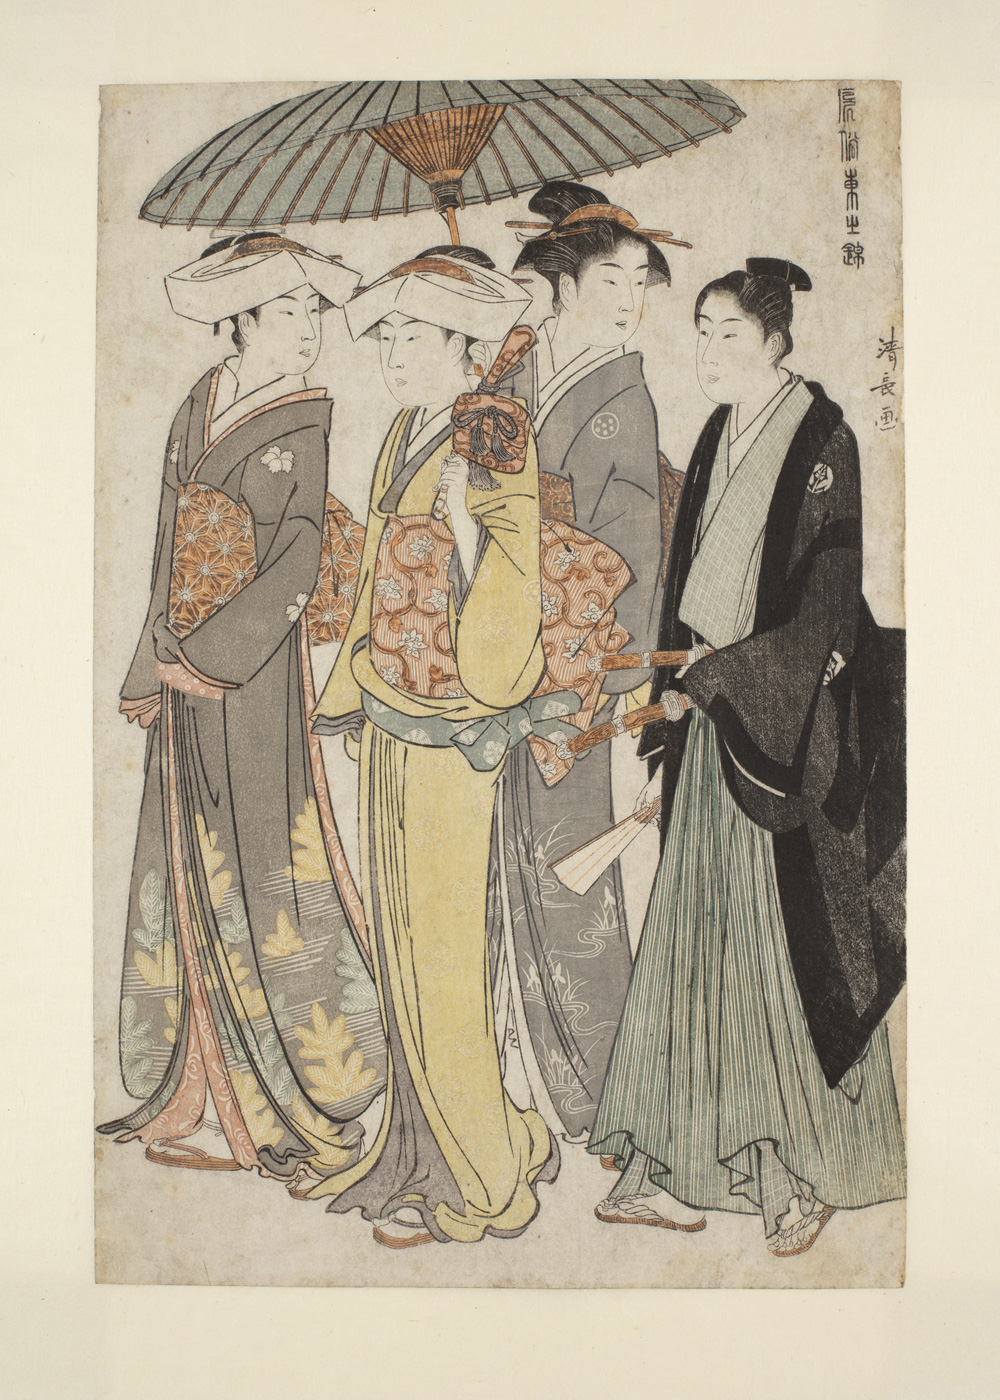 Japanese print of a group of women walking and wearing traditional robes. The first two women are elaborately dressed, a third holds a parasol over the group and a more plainly dressed one follows behind.